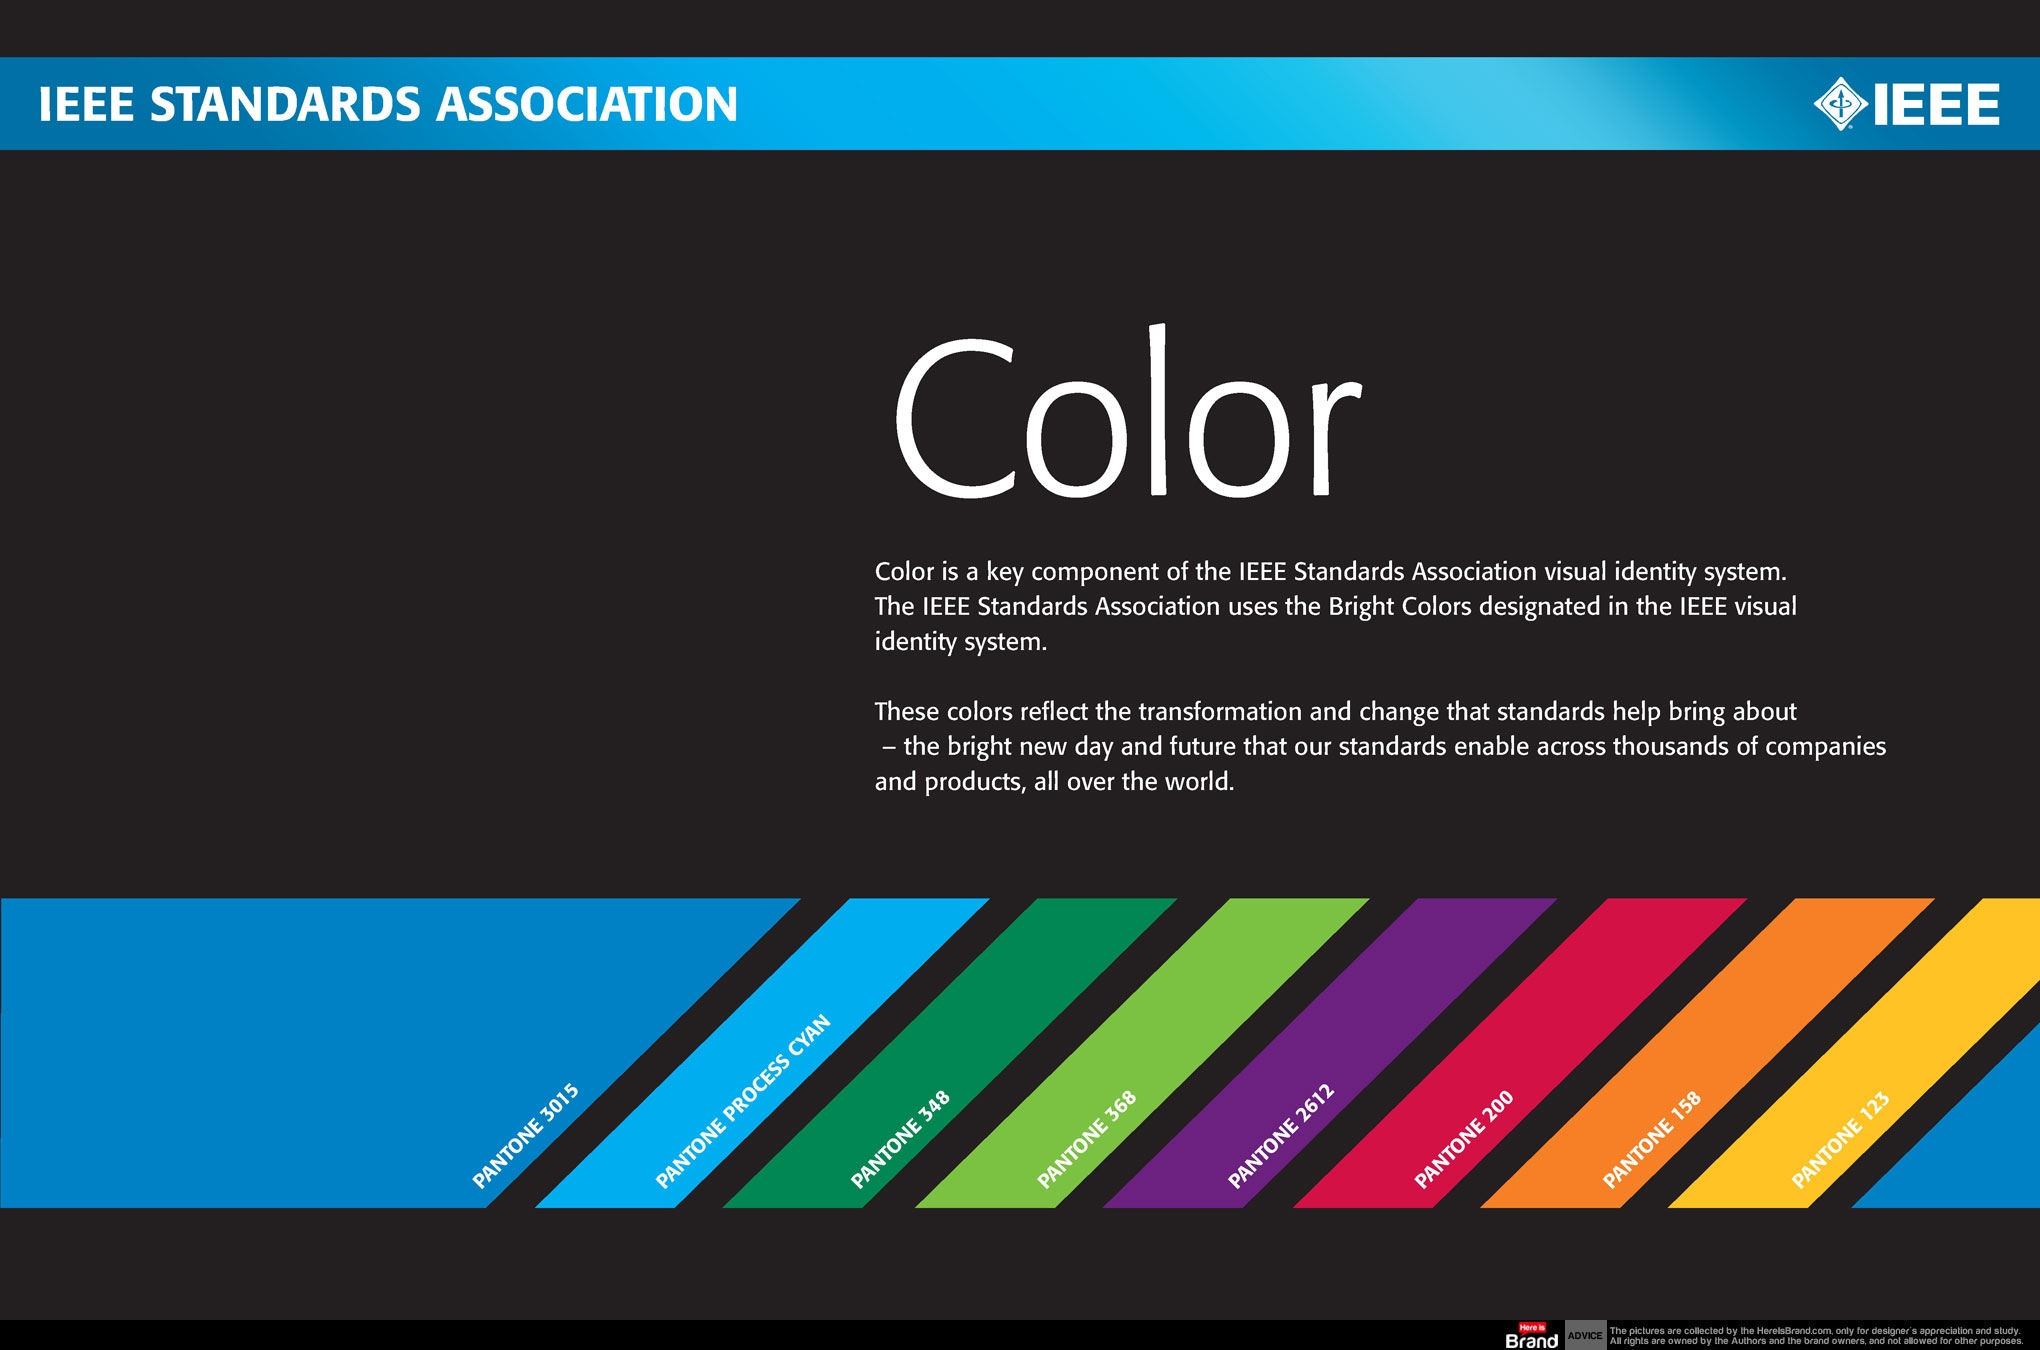 IEEE Standards Association visual identity guidelines